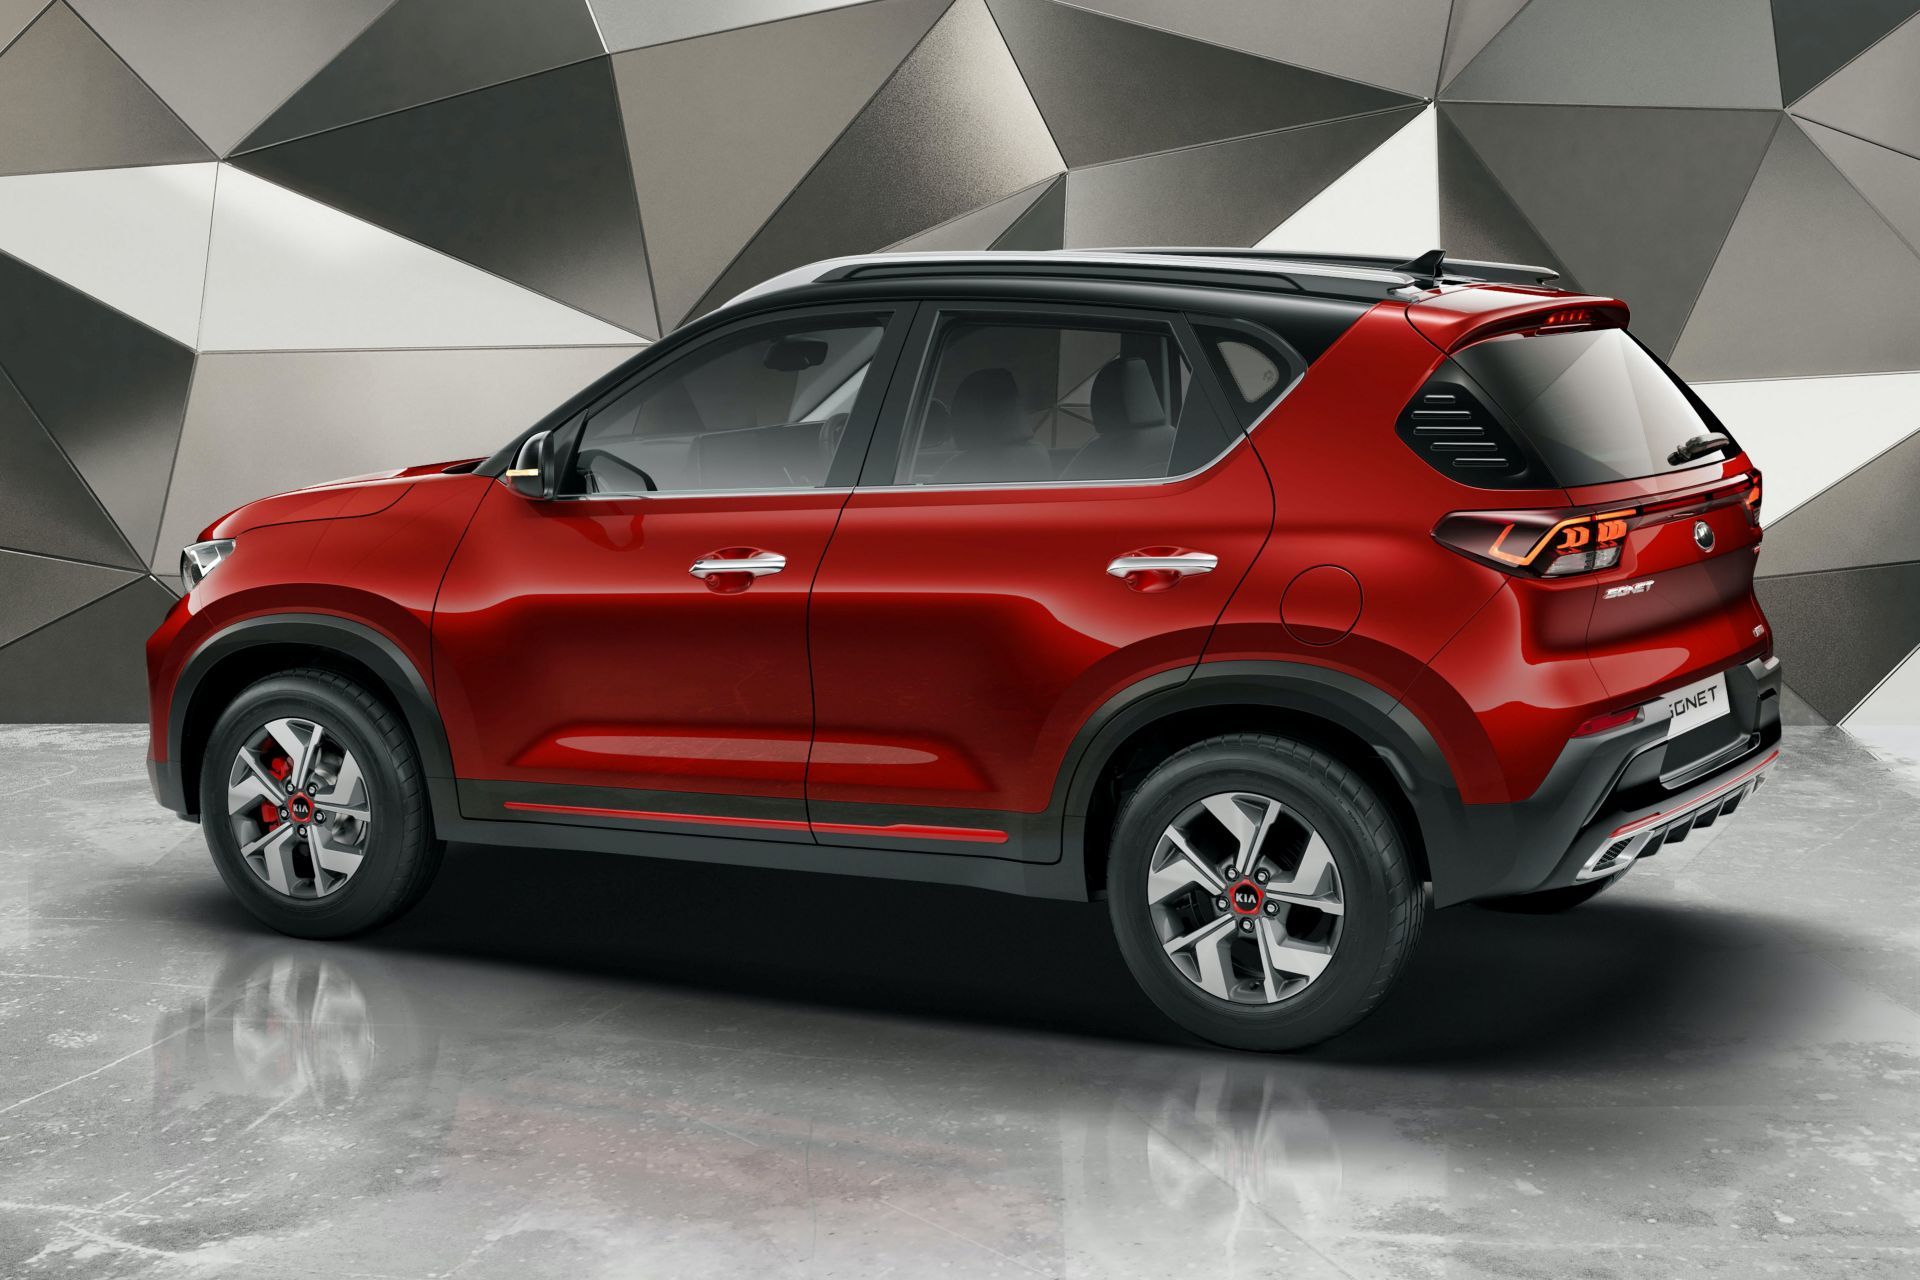 Kia Sonet Encapsulates The Brand's SUV Know How In A Tiny Package